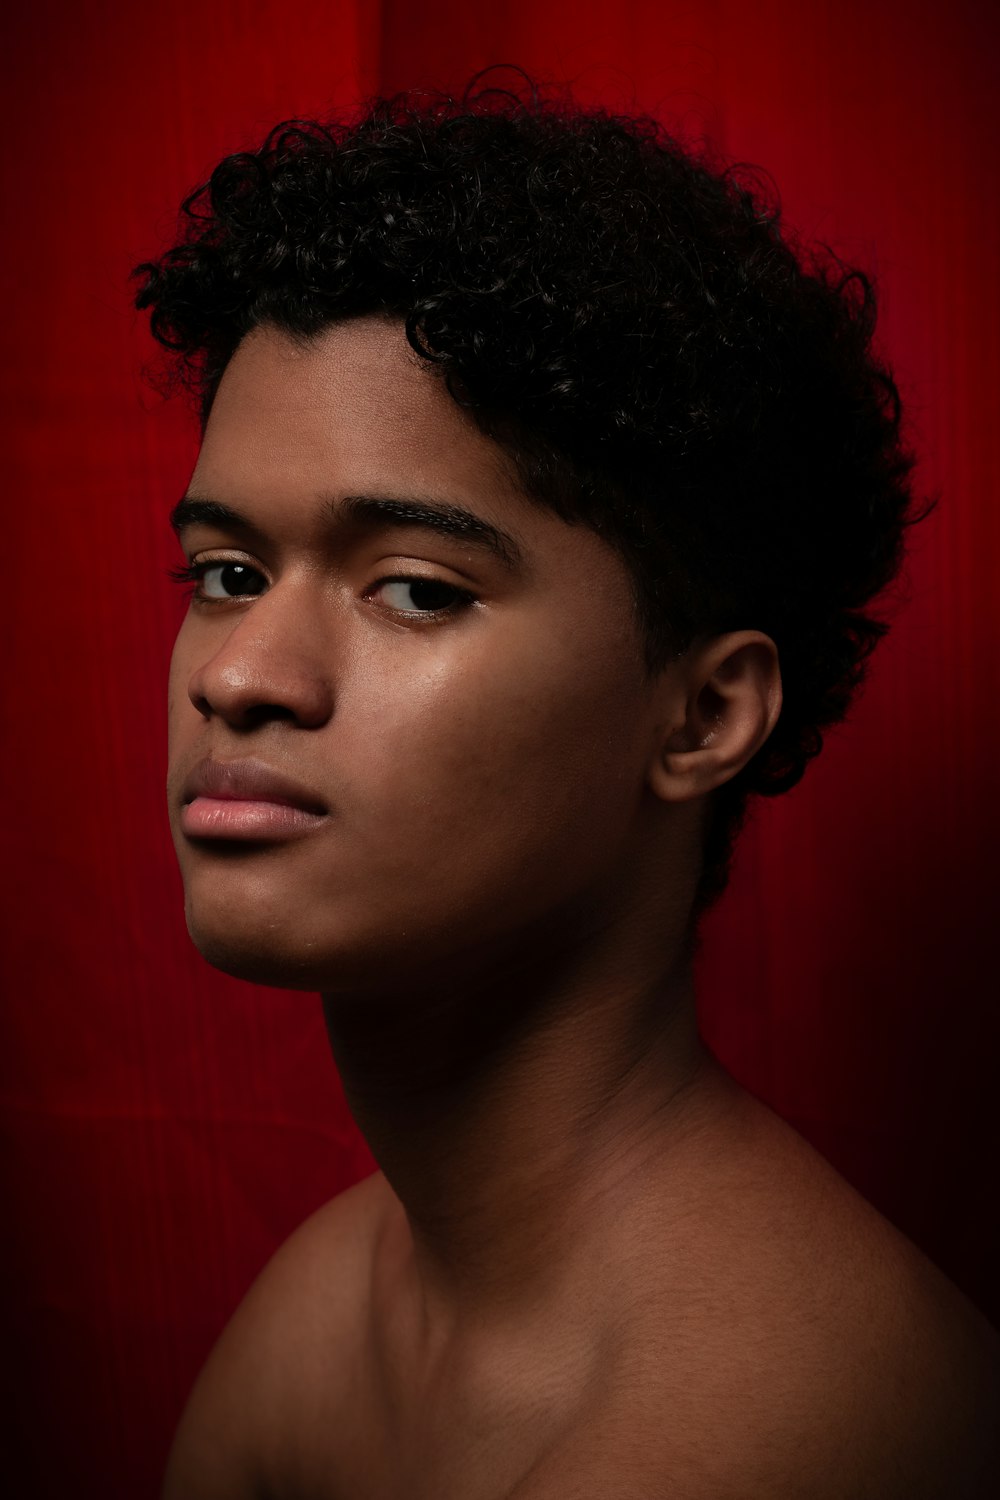 topless boy with black curly hair photo – Free Black Image on Unsplash